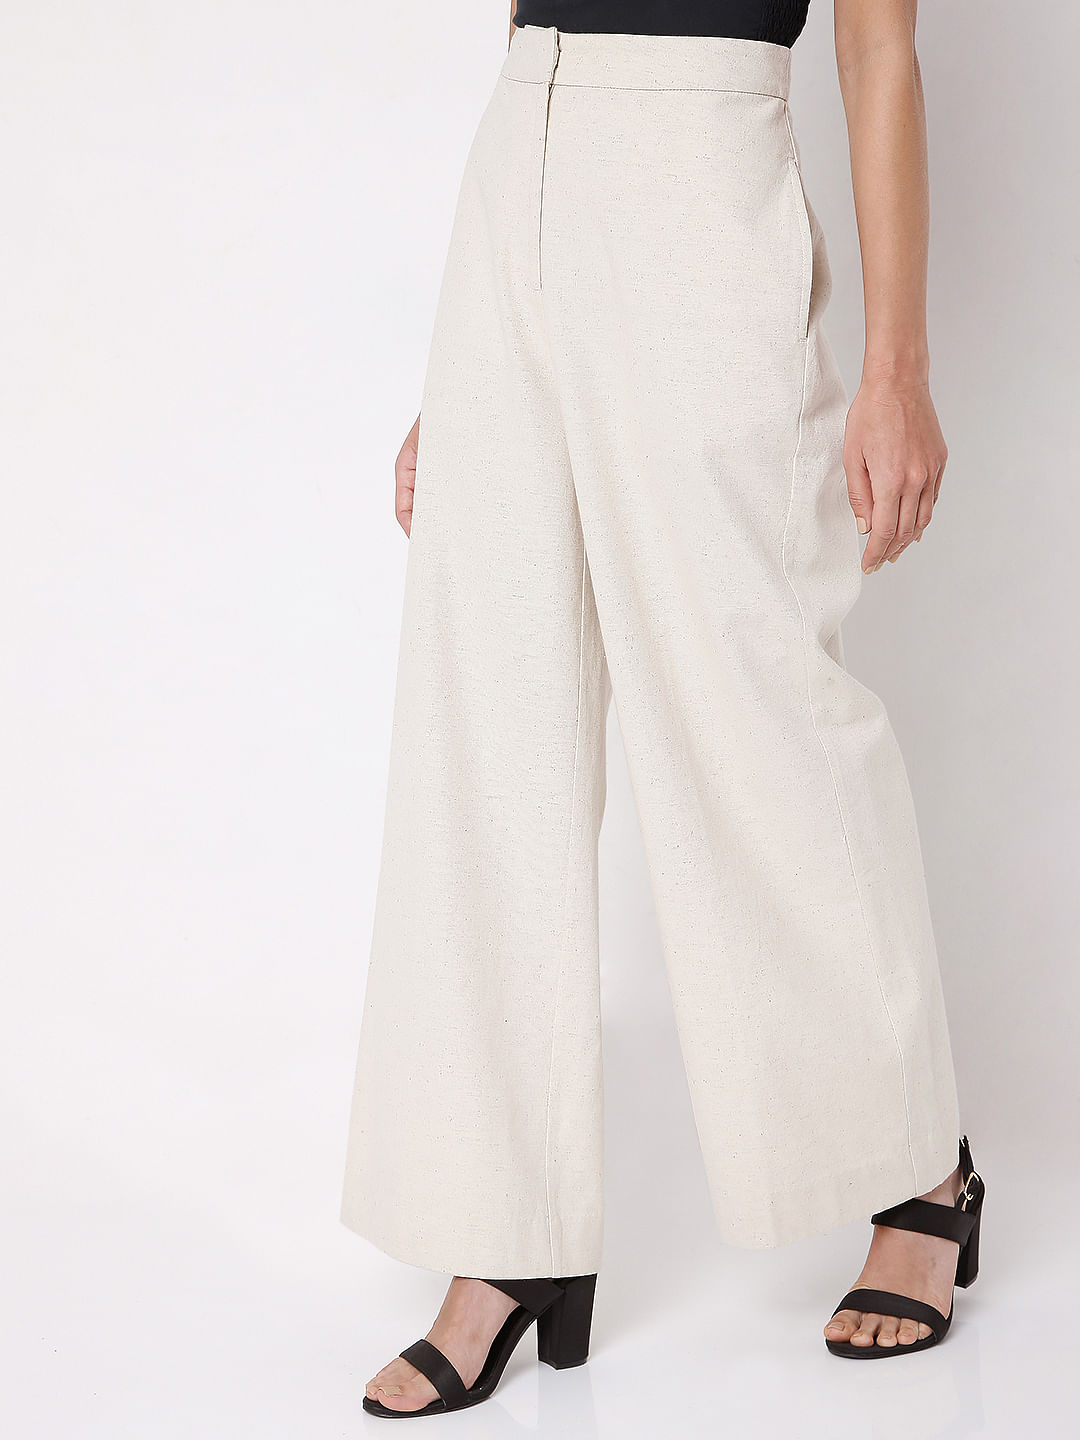 Buy security Womens Casual Wide Leg Pleated High Waist Palazzo Pants  Trousers White S at Amazonin